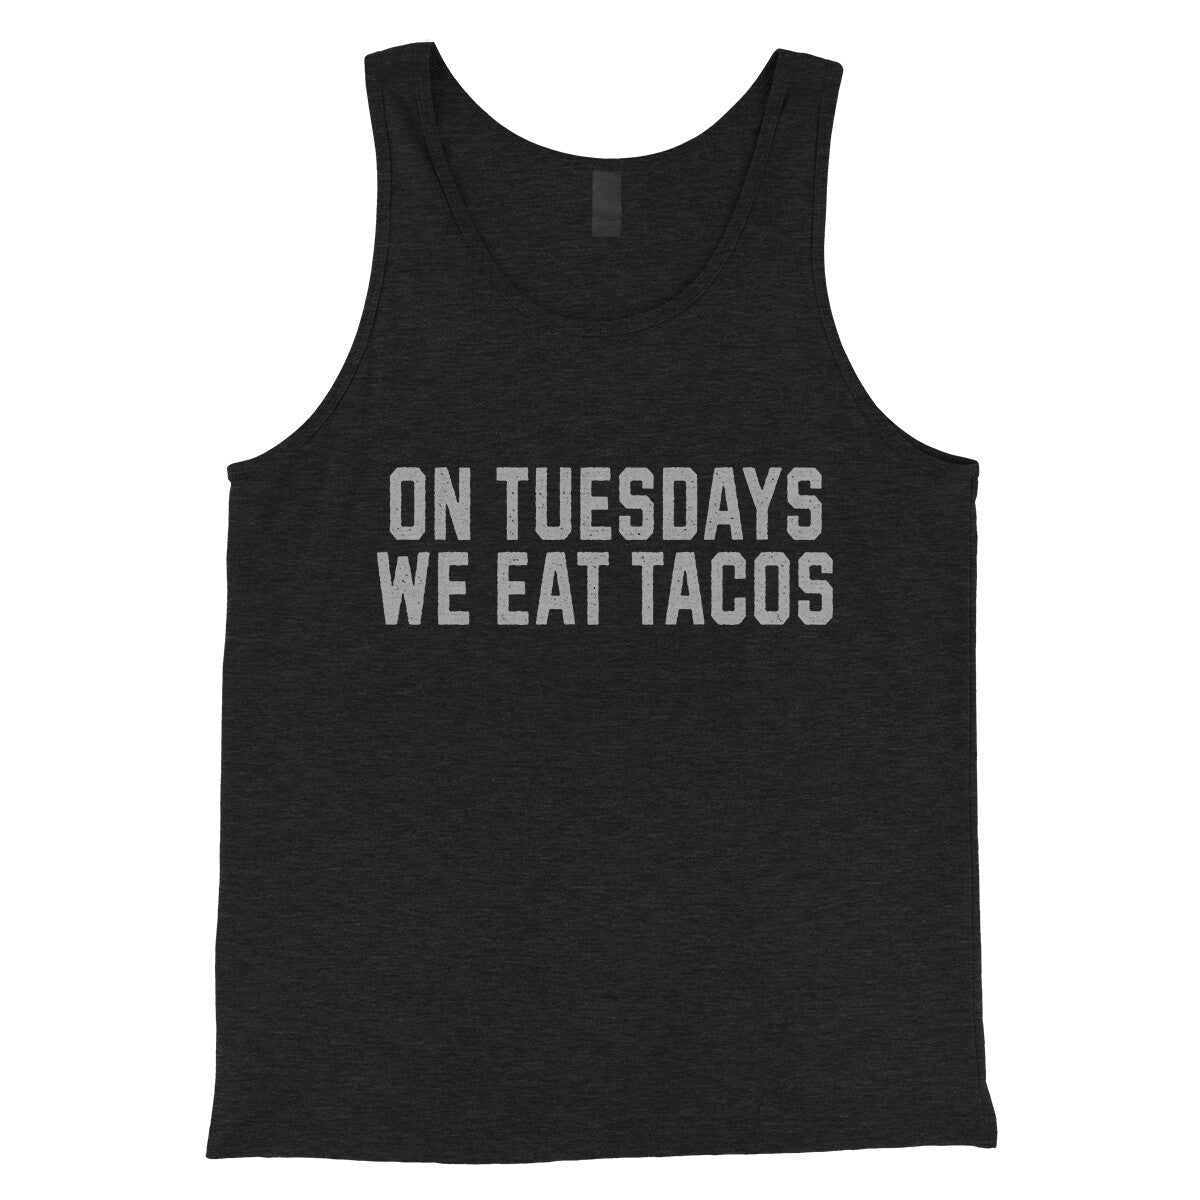 On Tuesdays We Eat Tacos in Charcoal Black TriBlend Color